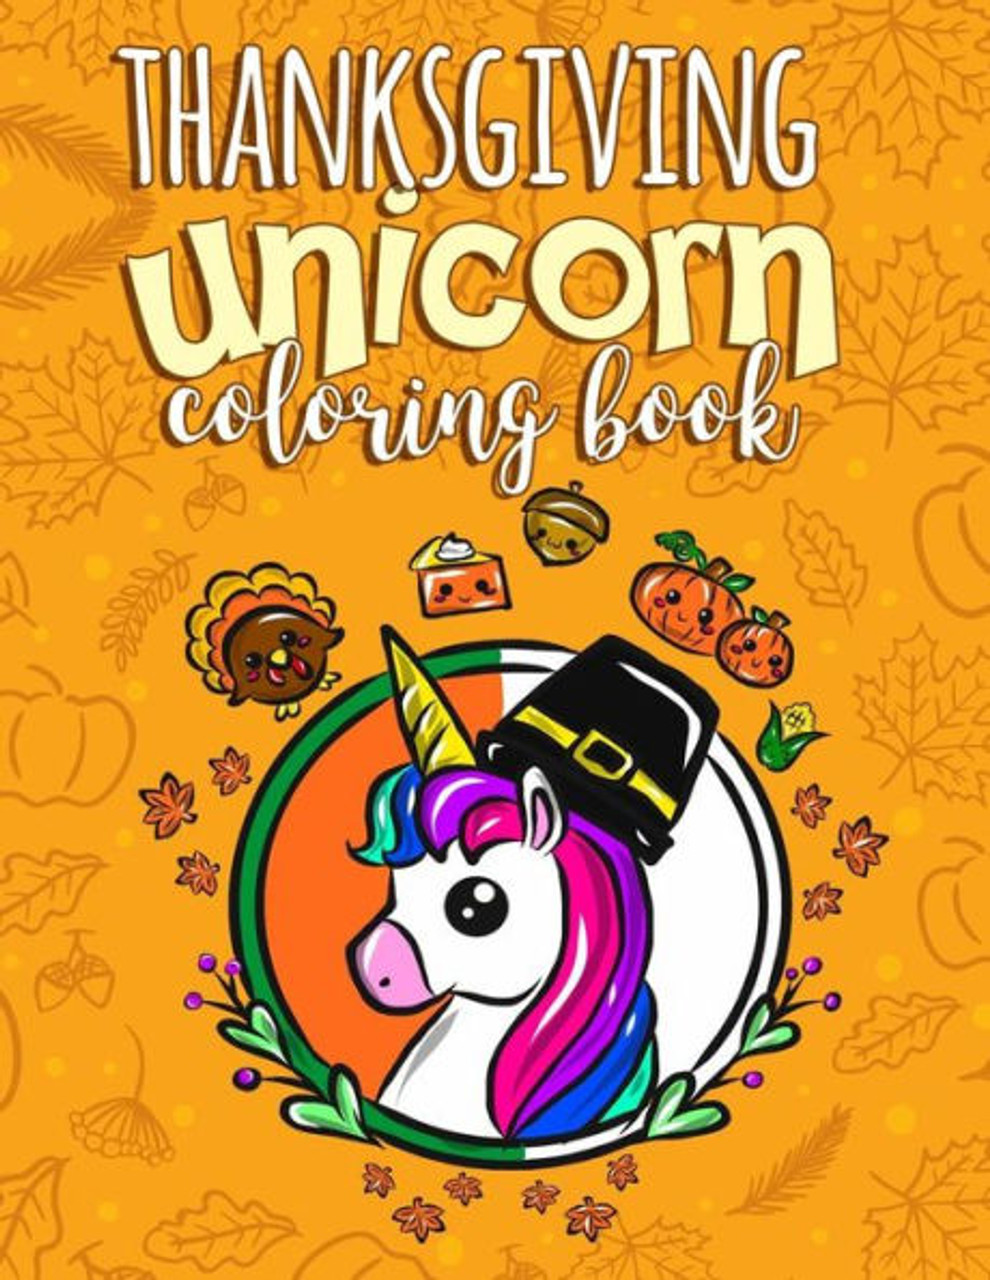 Coloring Book of Unicorns: Unicorn Coloring Book for Adults, Teens